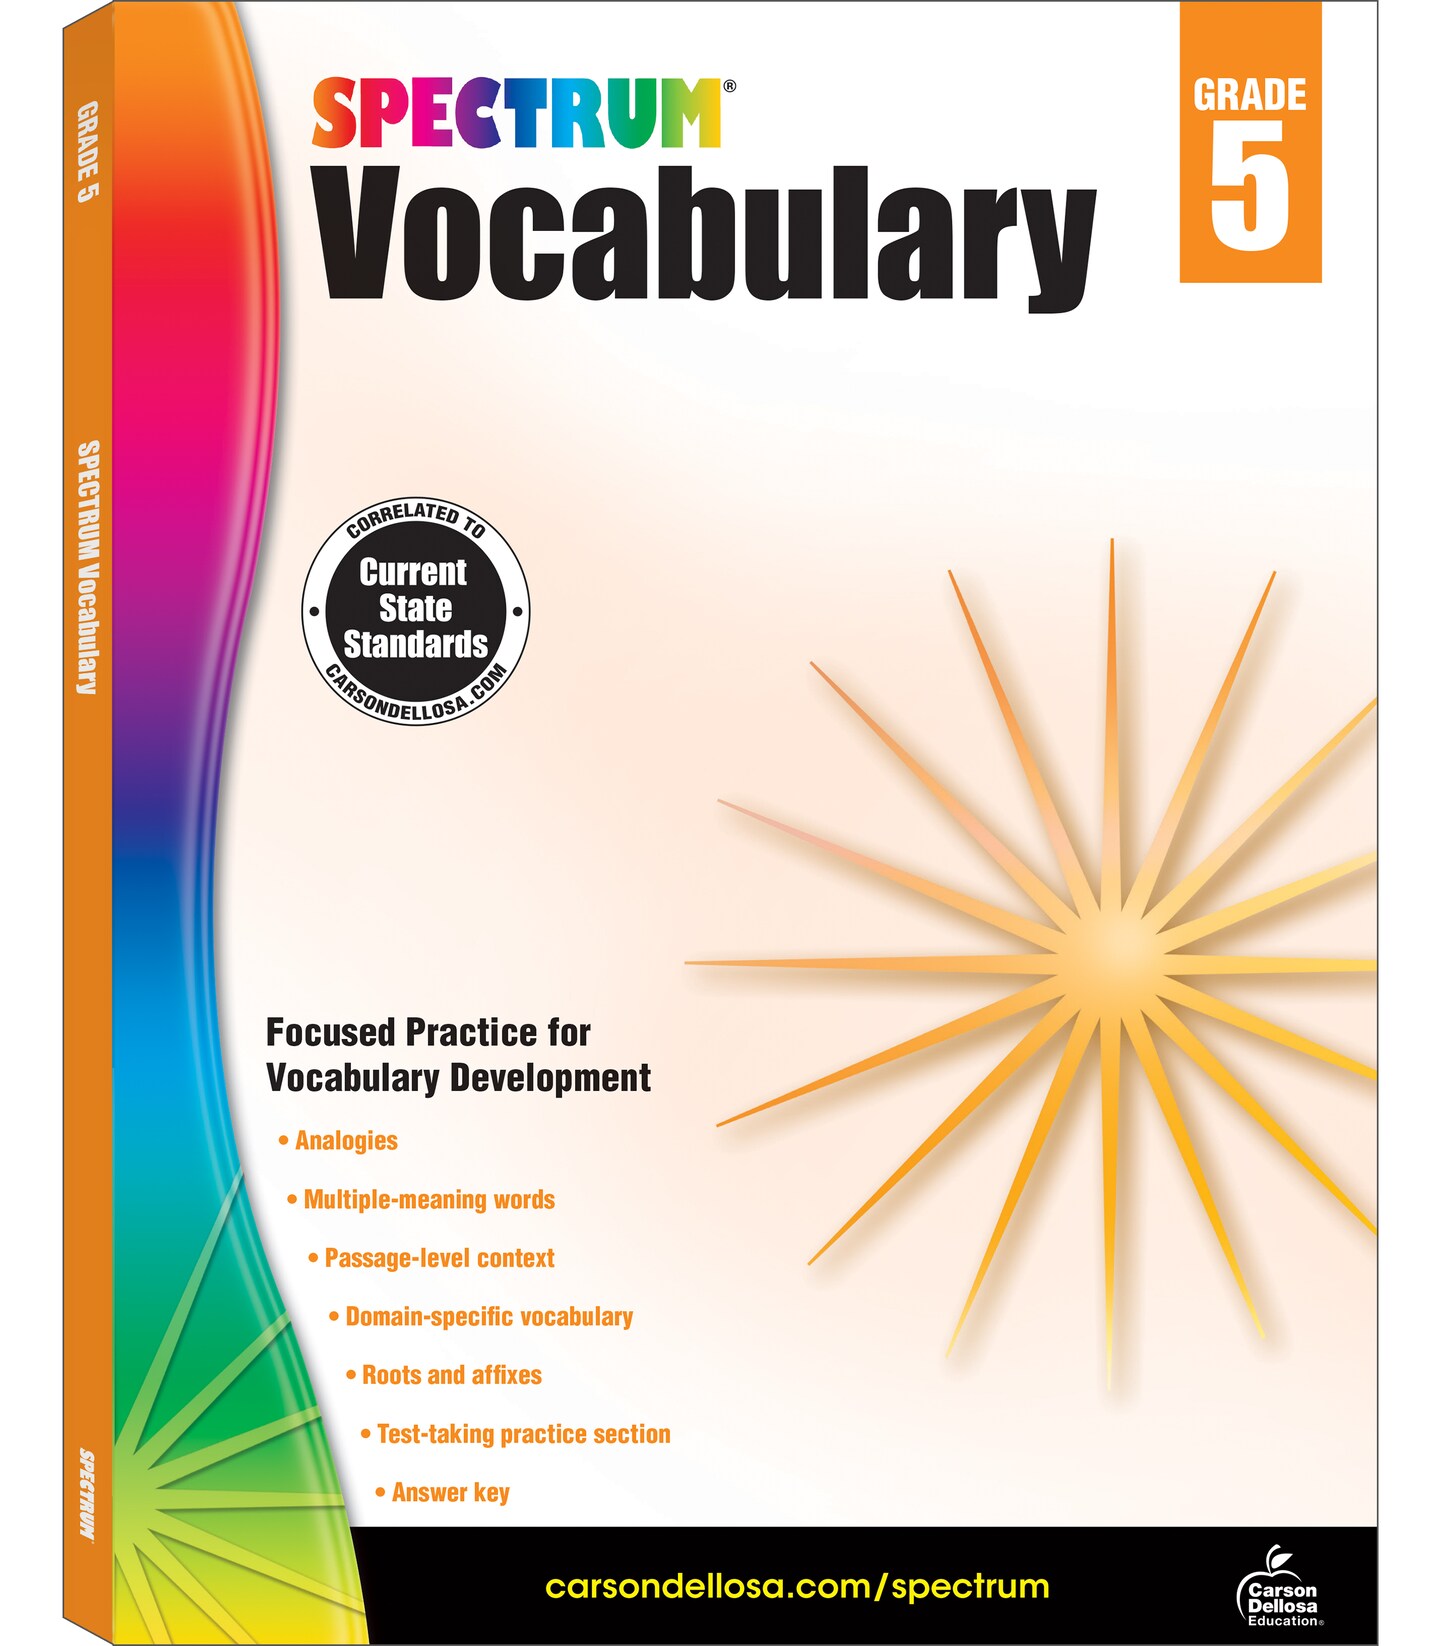 Spectrum 5th Grade Vocabulary Workbooks, Ages 10 to 11, Grade 5 Vocabulary, Reading Comprehension Context Clues, Vocabulary Analogies, Multiple-Meaning Words, Roots and Affixes - 160 Pages